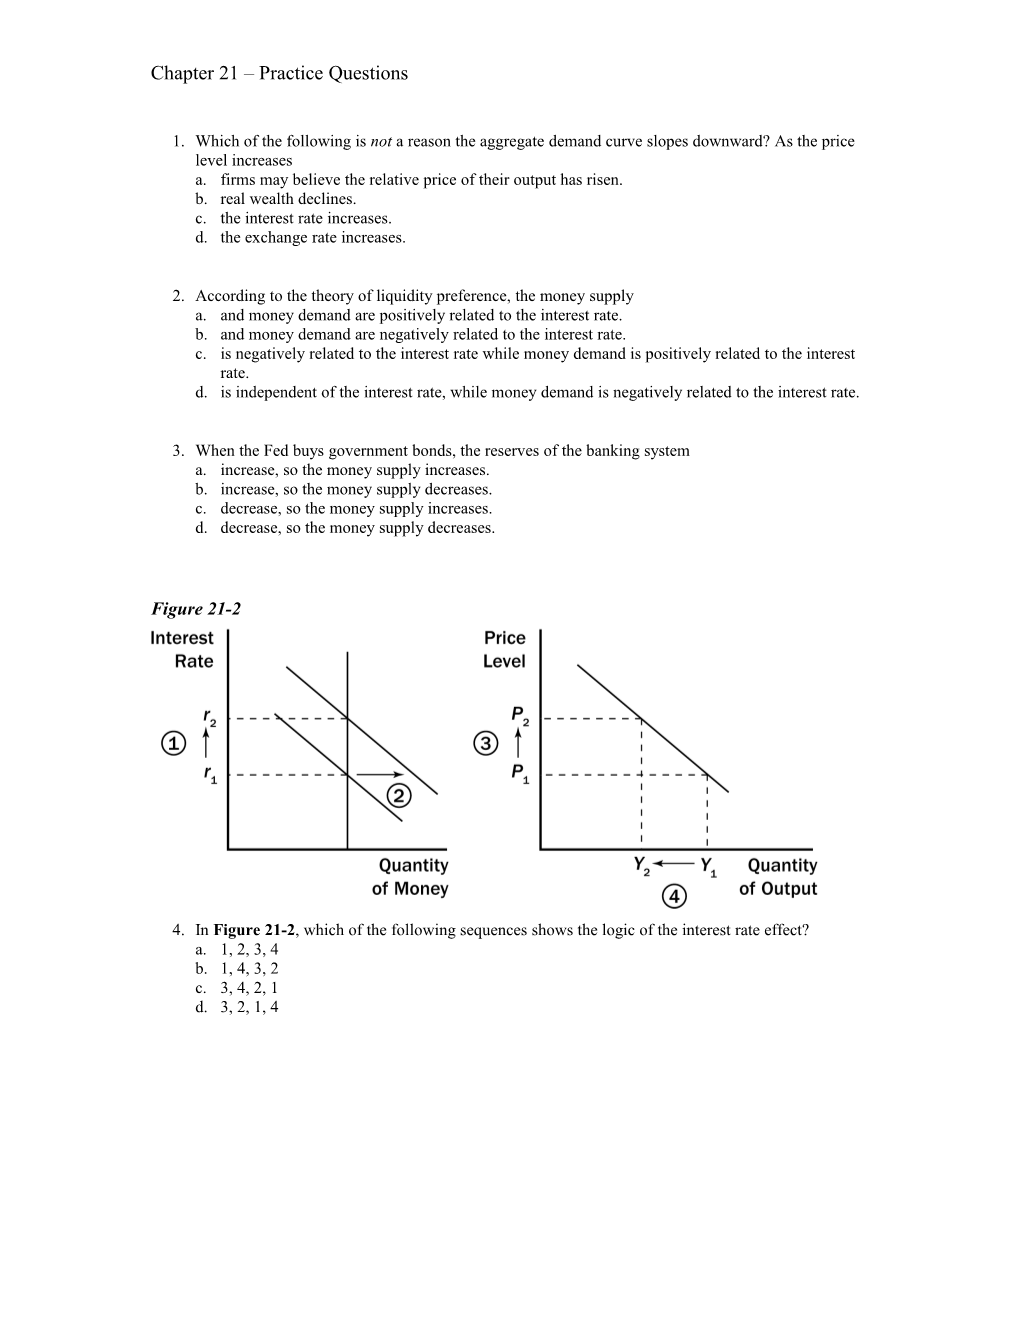 Chapter 21 Practice Questions